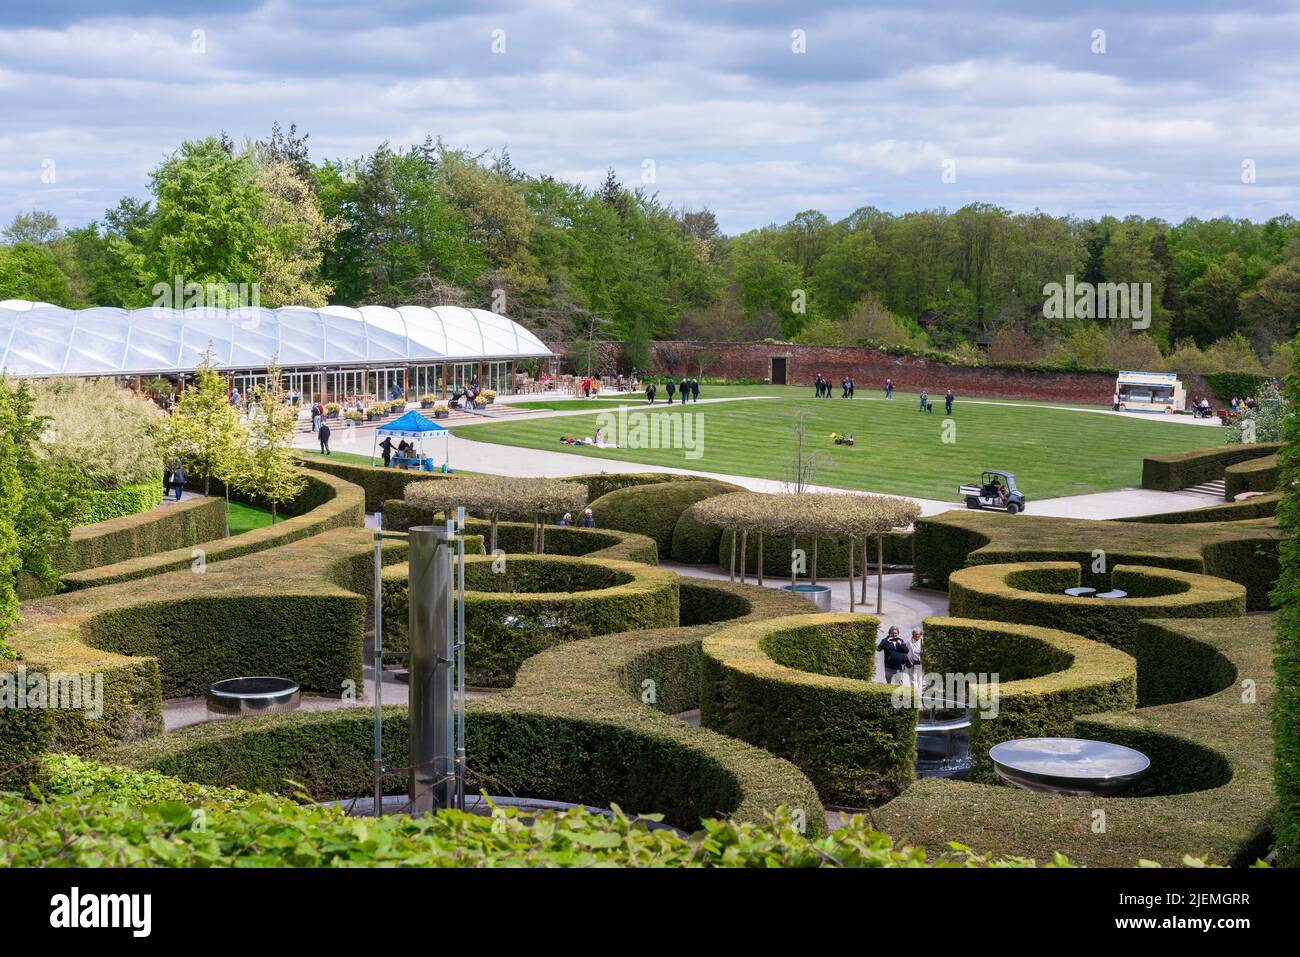 Alnwick Garden, view in late spring of the Serpent Garden, an interactive site in Alnwick Garden, a popular attraction in the Northumberland town, UK Stock Photo